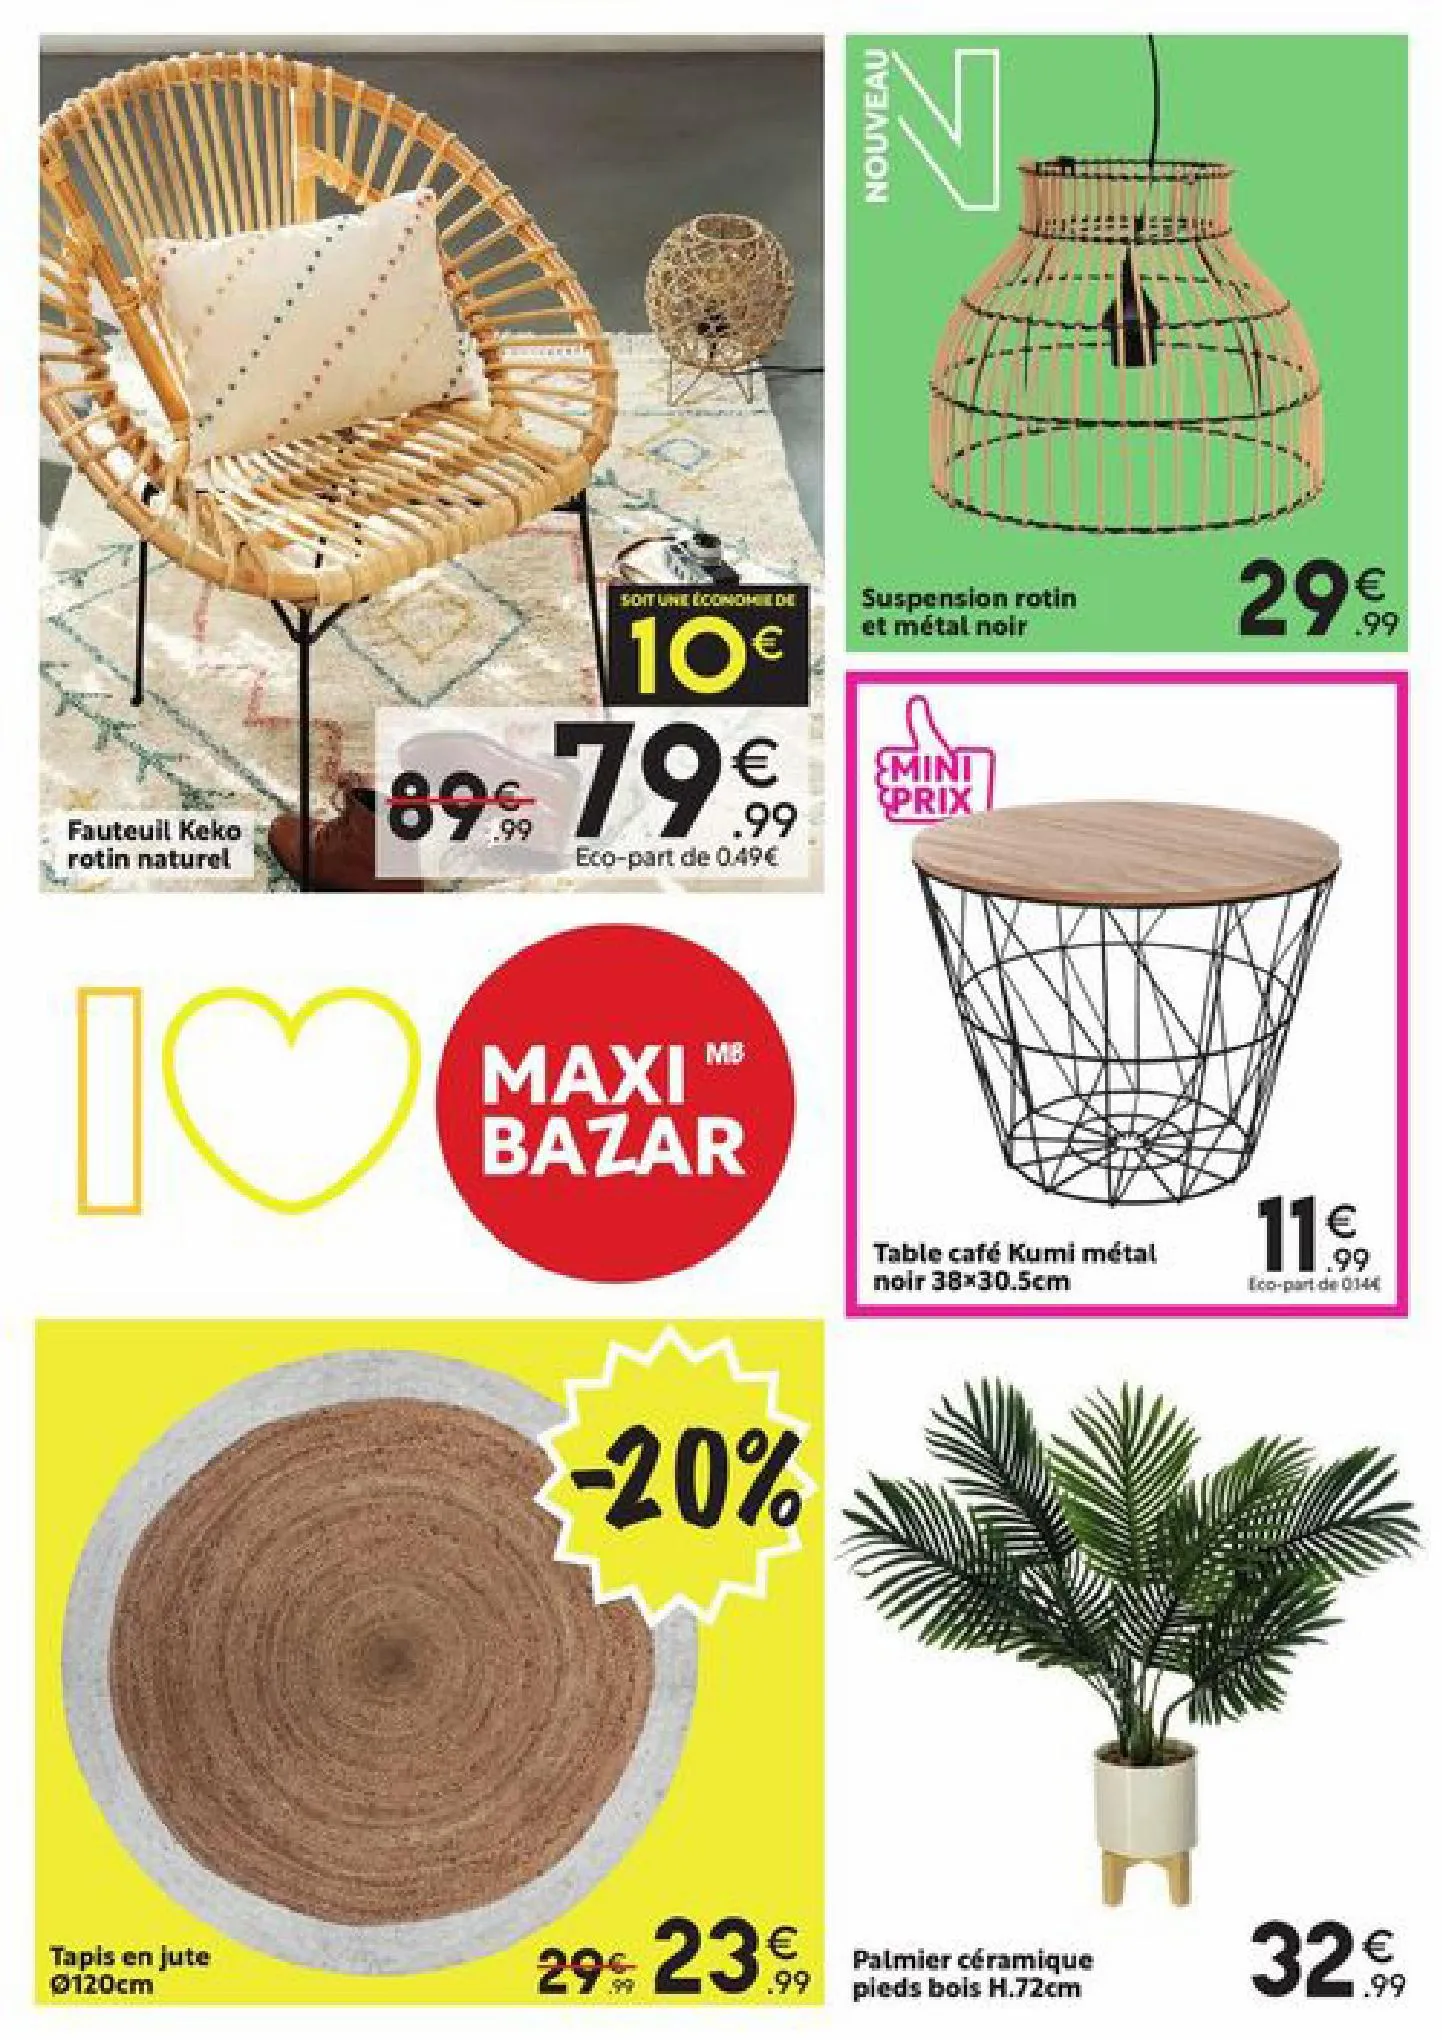 Catalogue DYA Shopping offres, page 00011